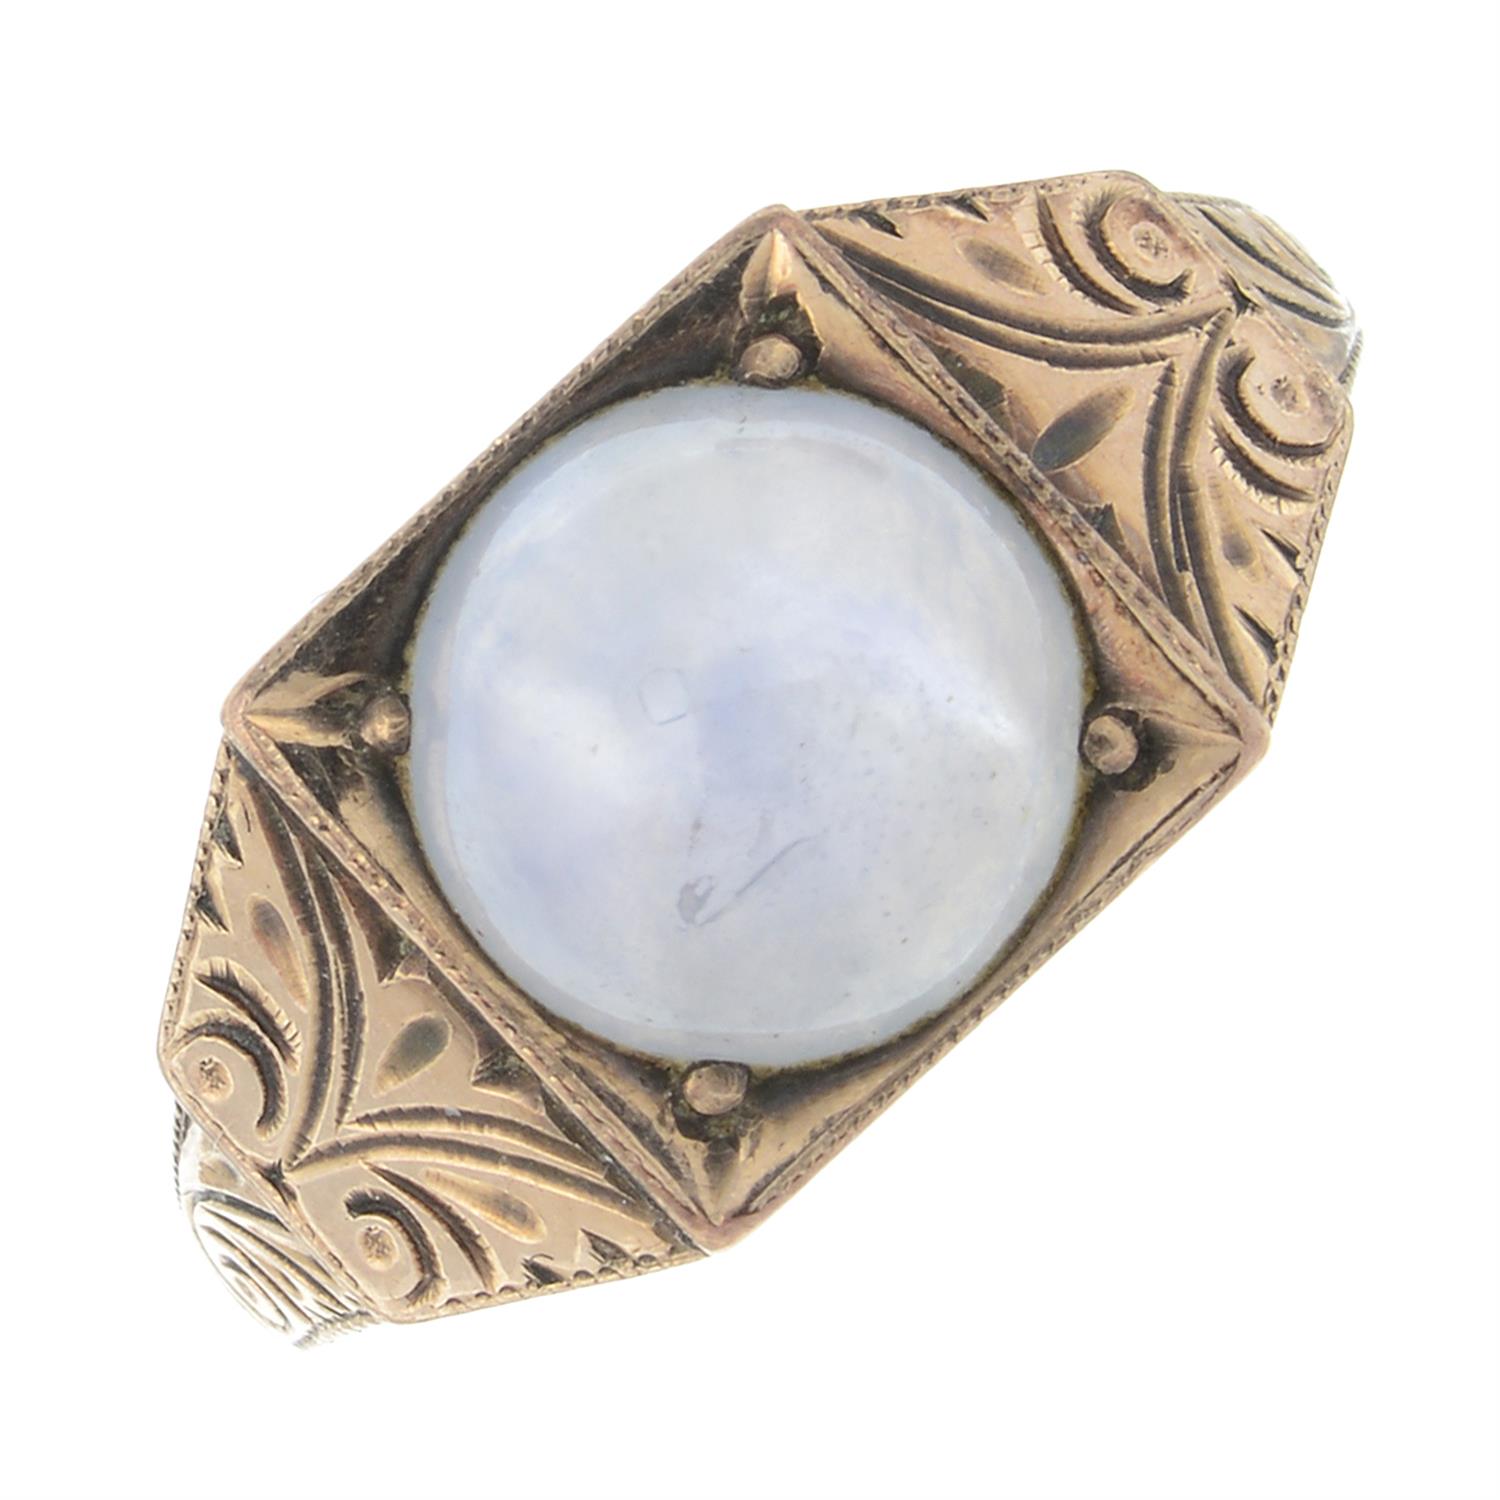 A star sapphire single-stone engraved signet ring.